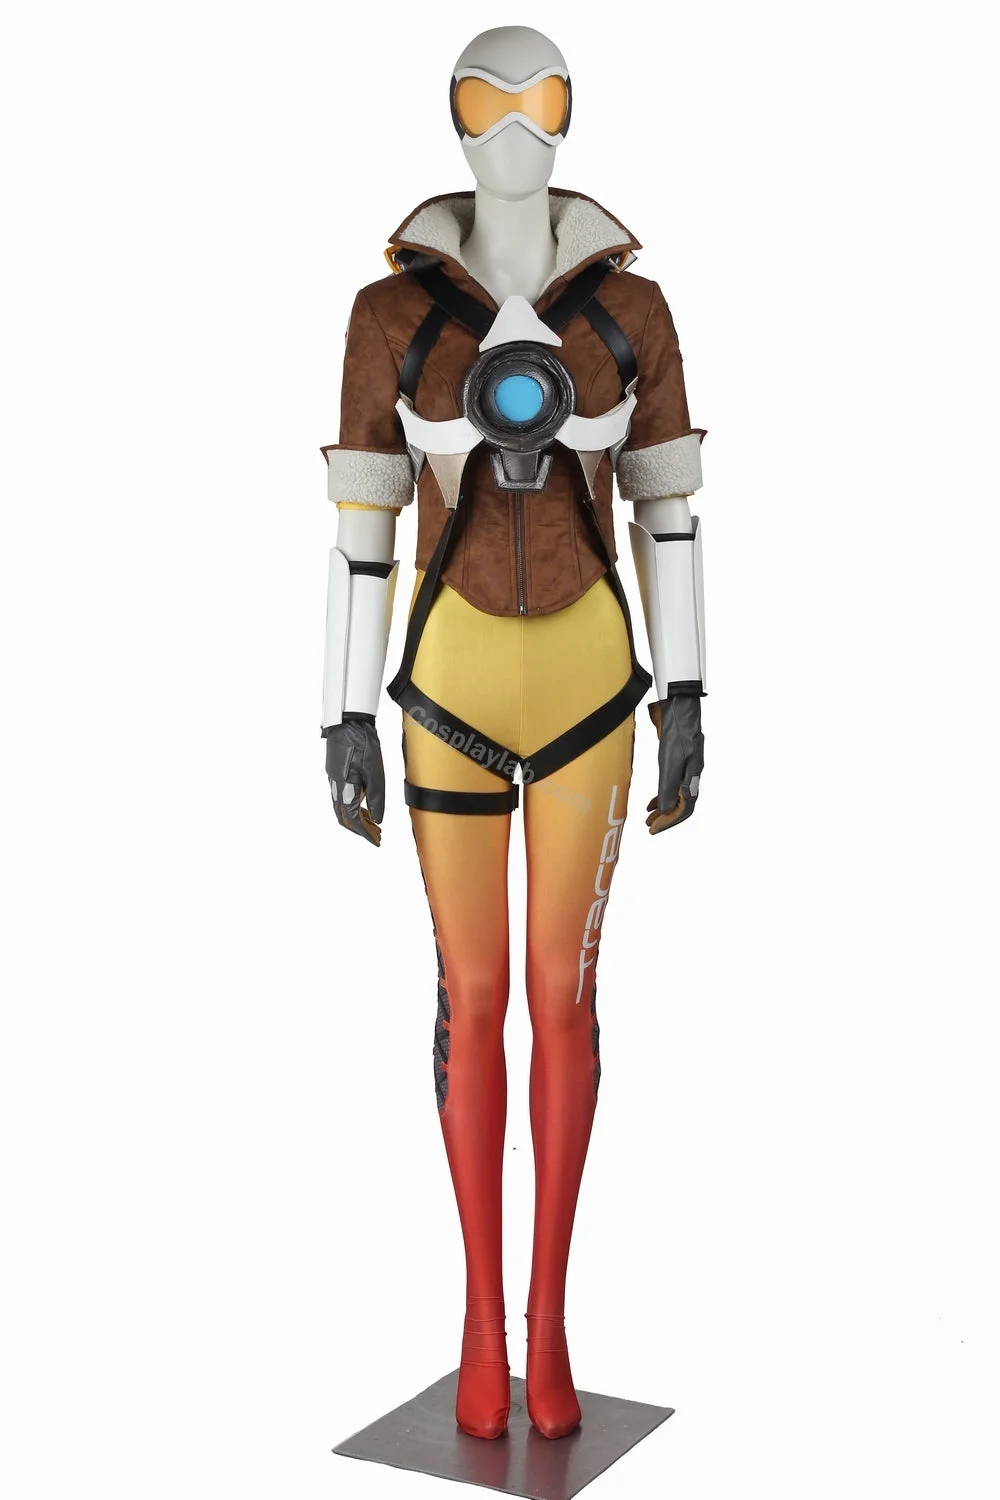 tracer outfit tracer overwatch costume halloween cosplay costume tracer Lena Oxton suit By CosplayLab